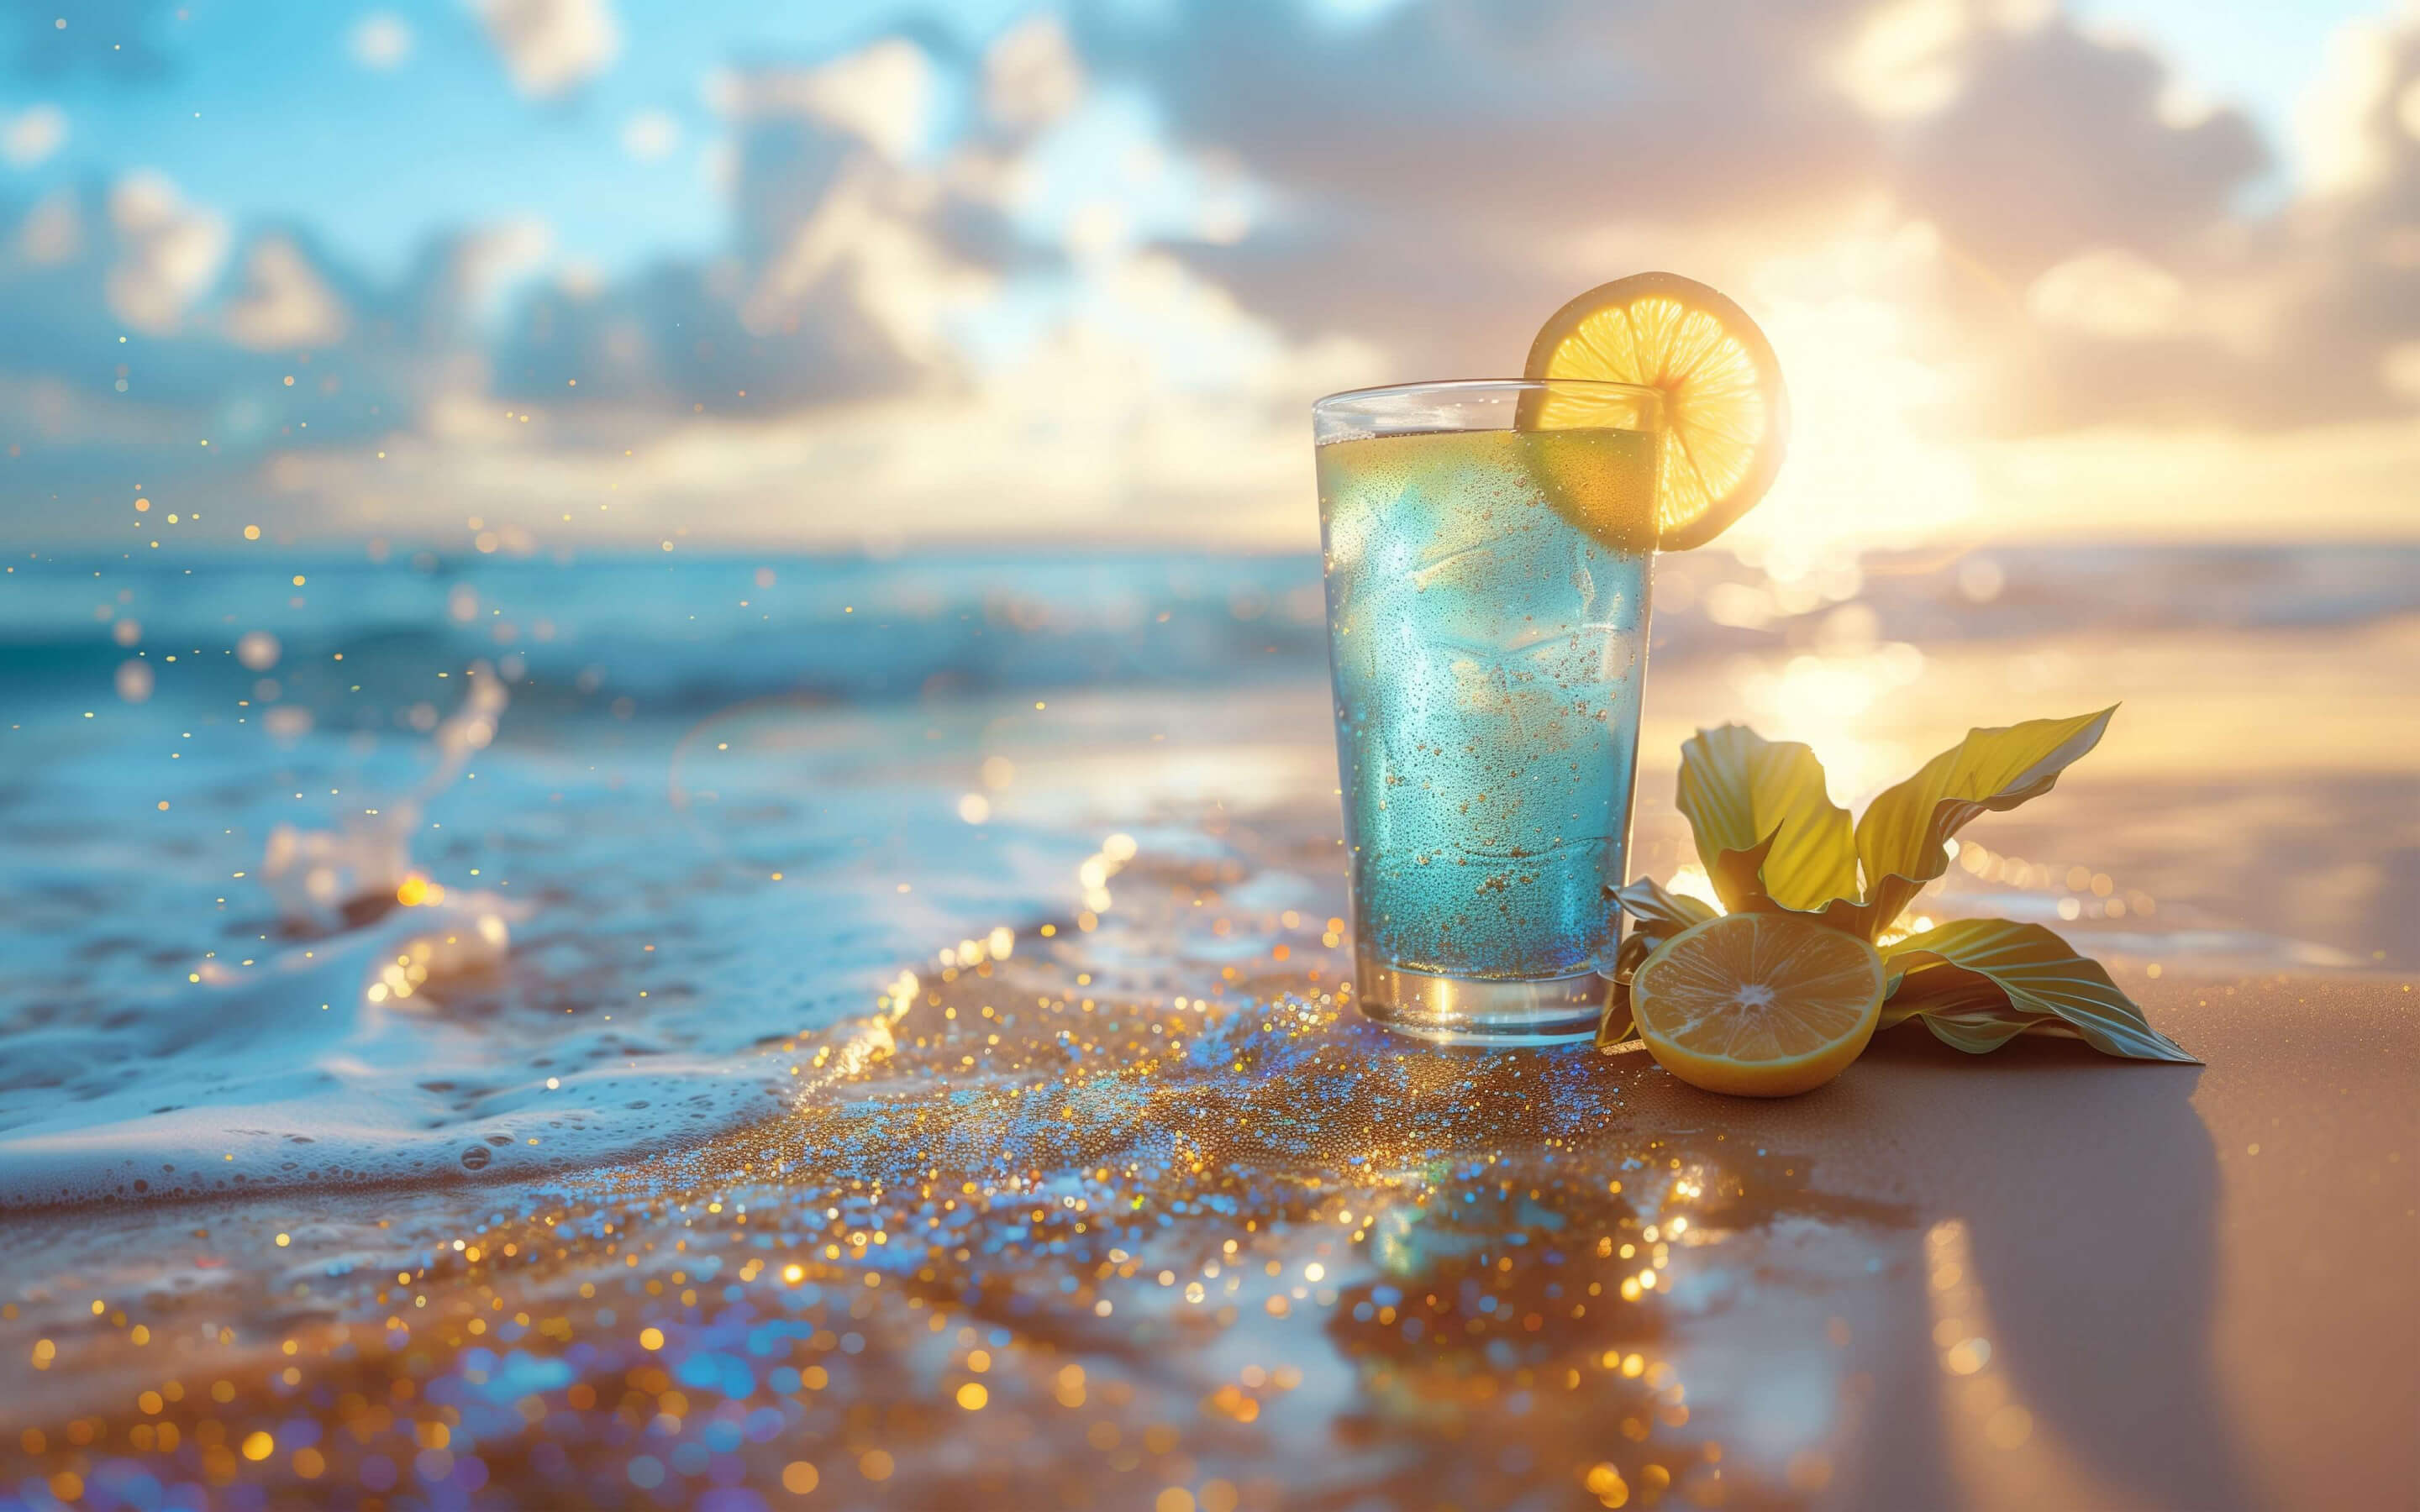 Cold drink on the ocean shore wallpaper 2880x1800